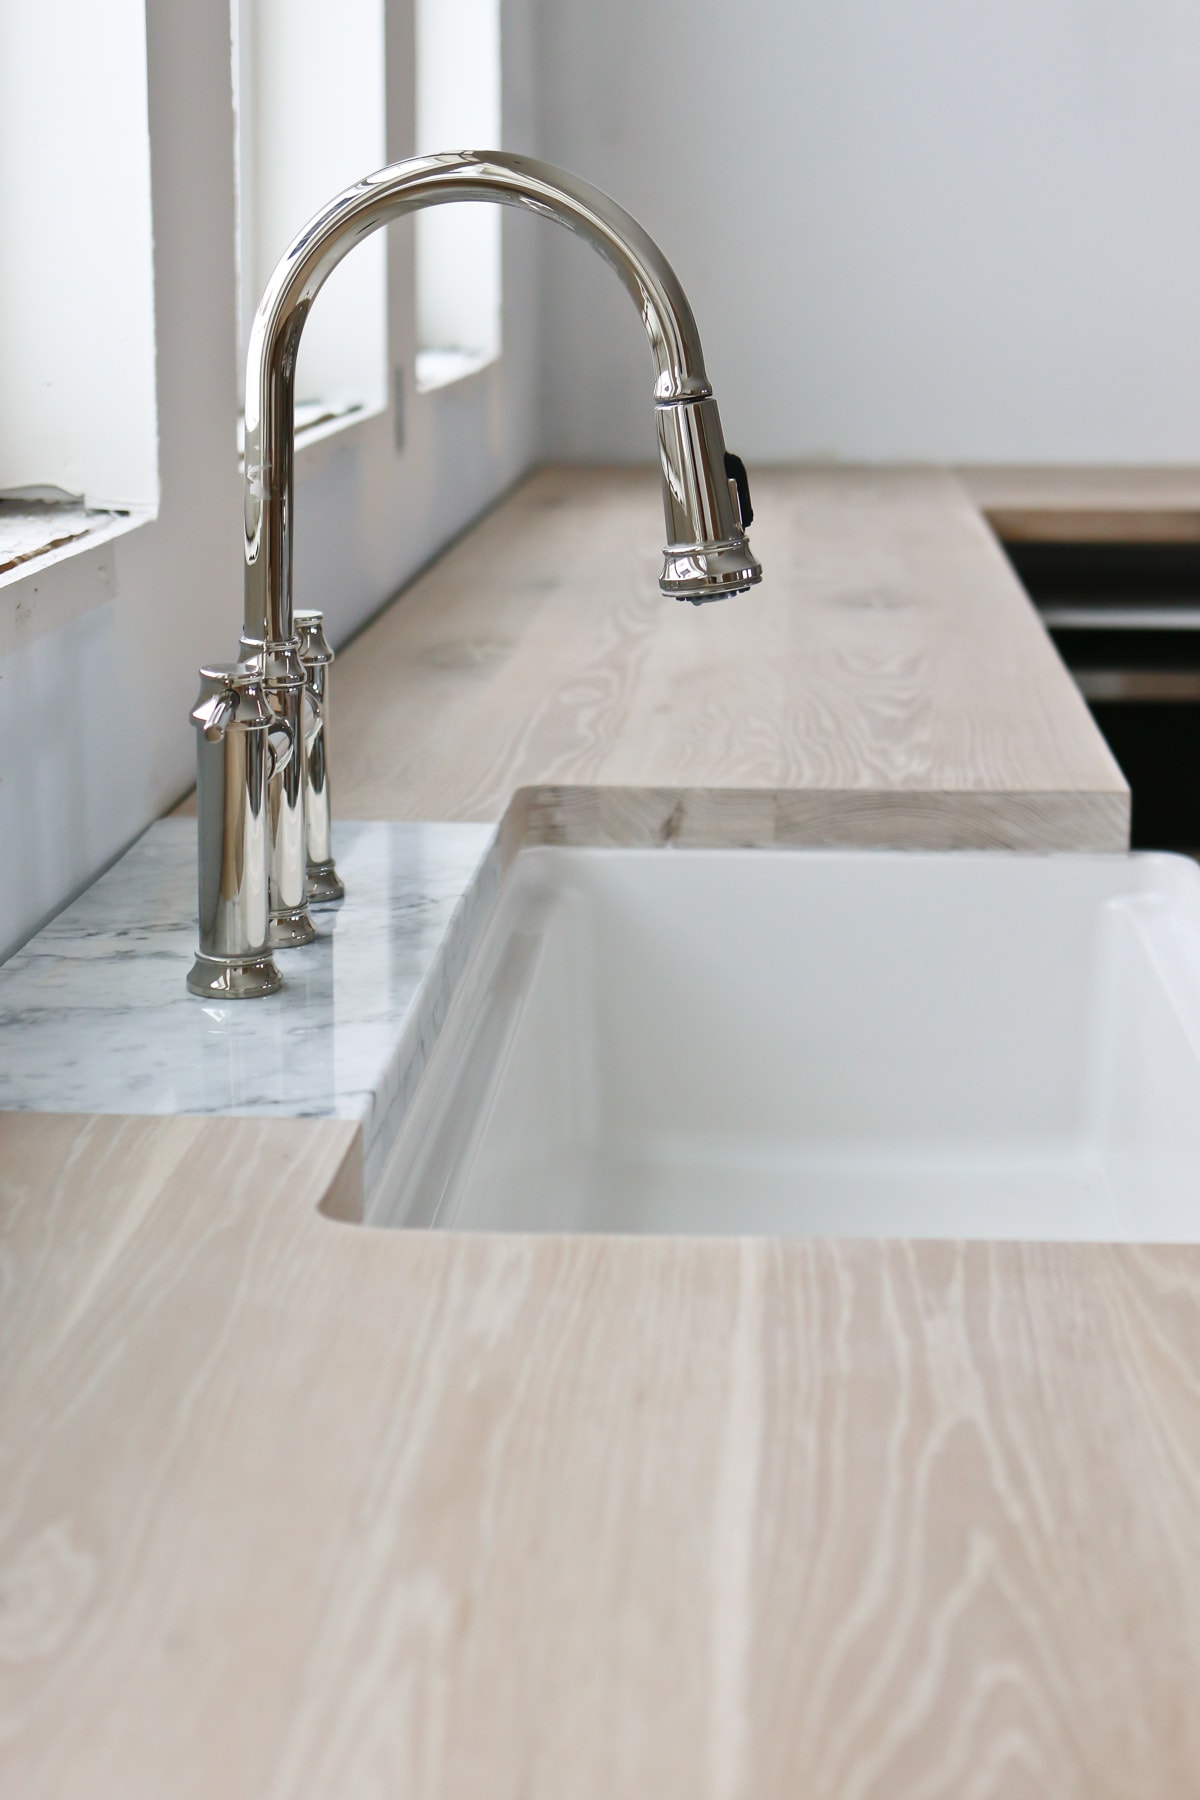 overview of the sink and countertop